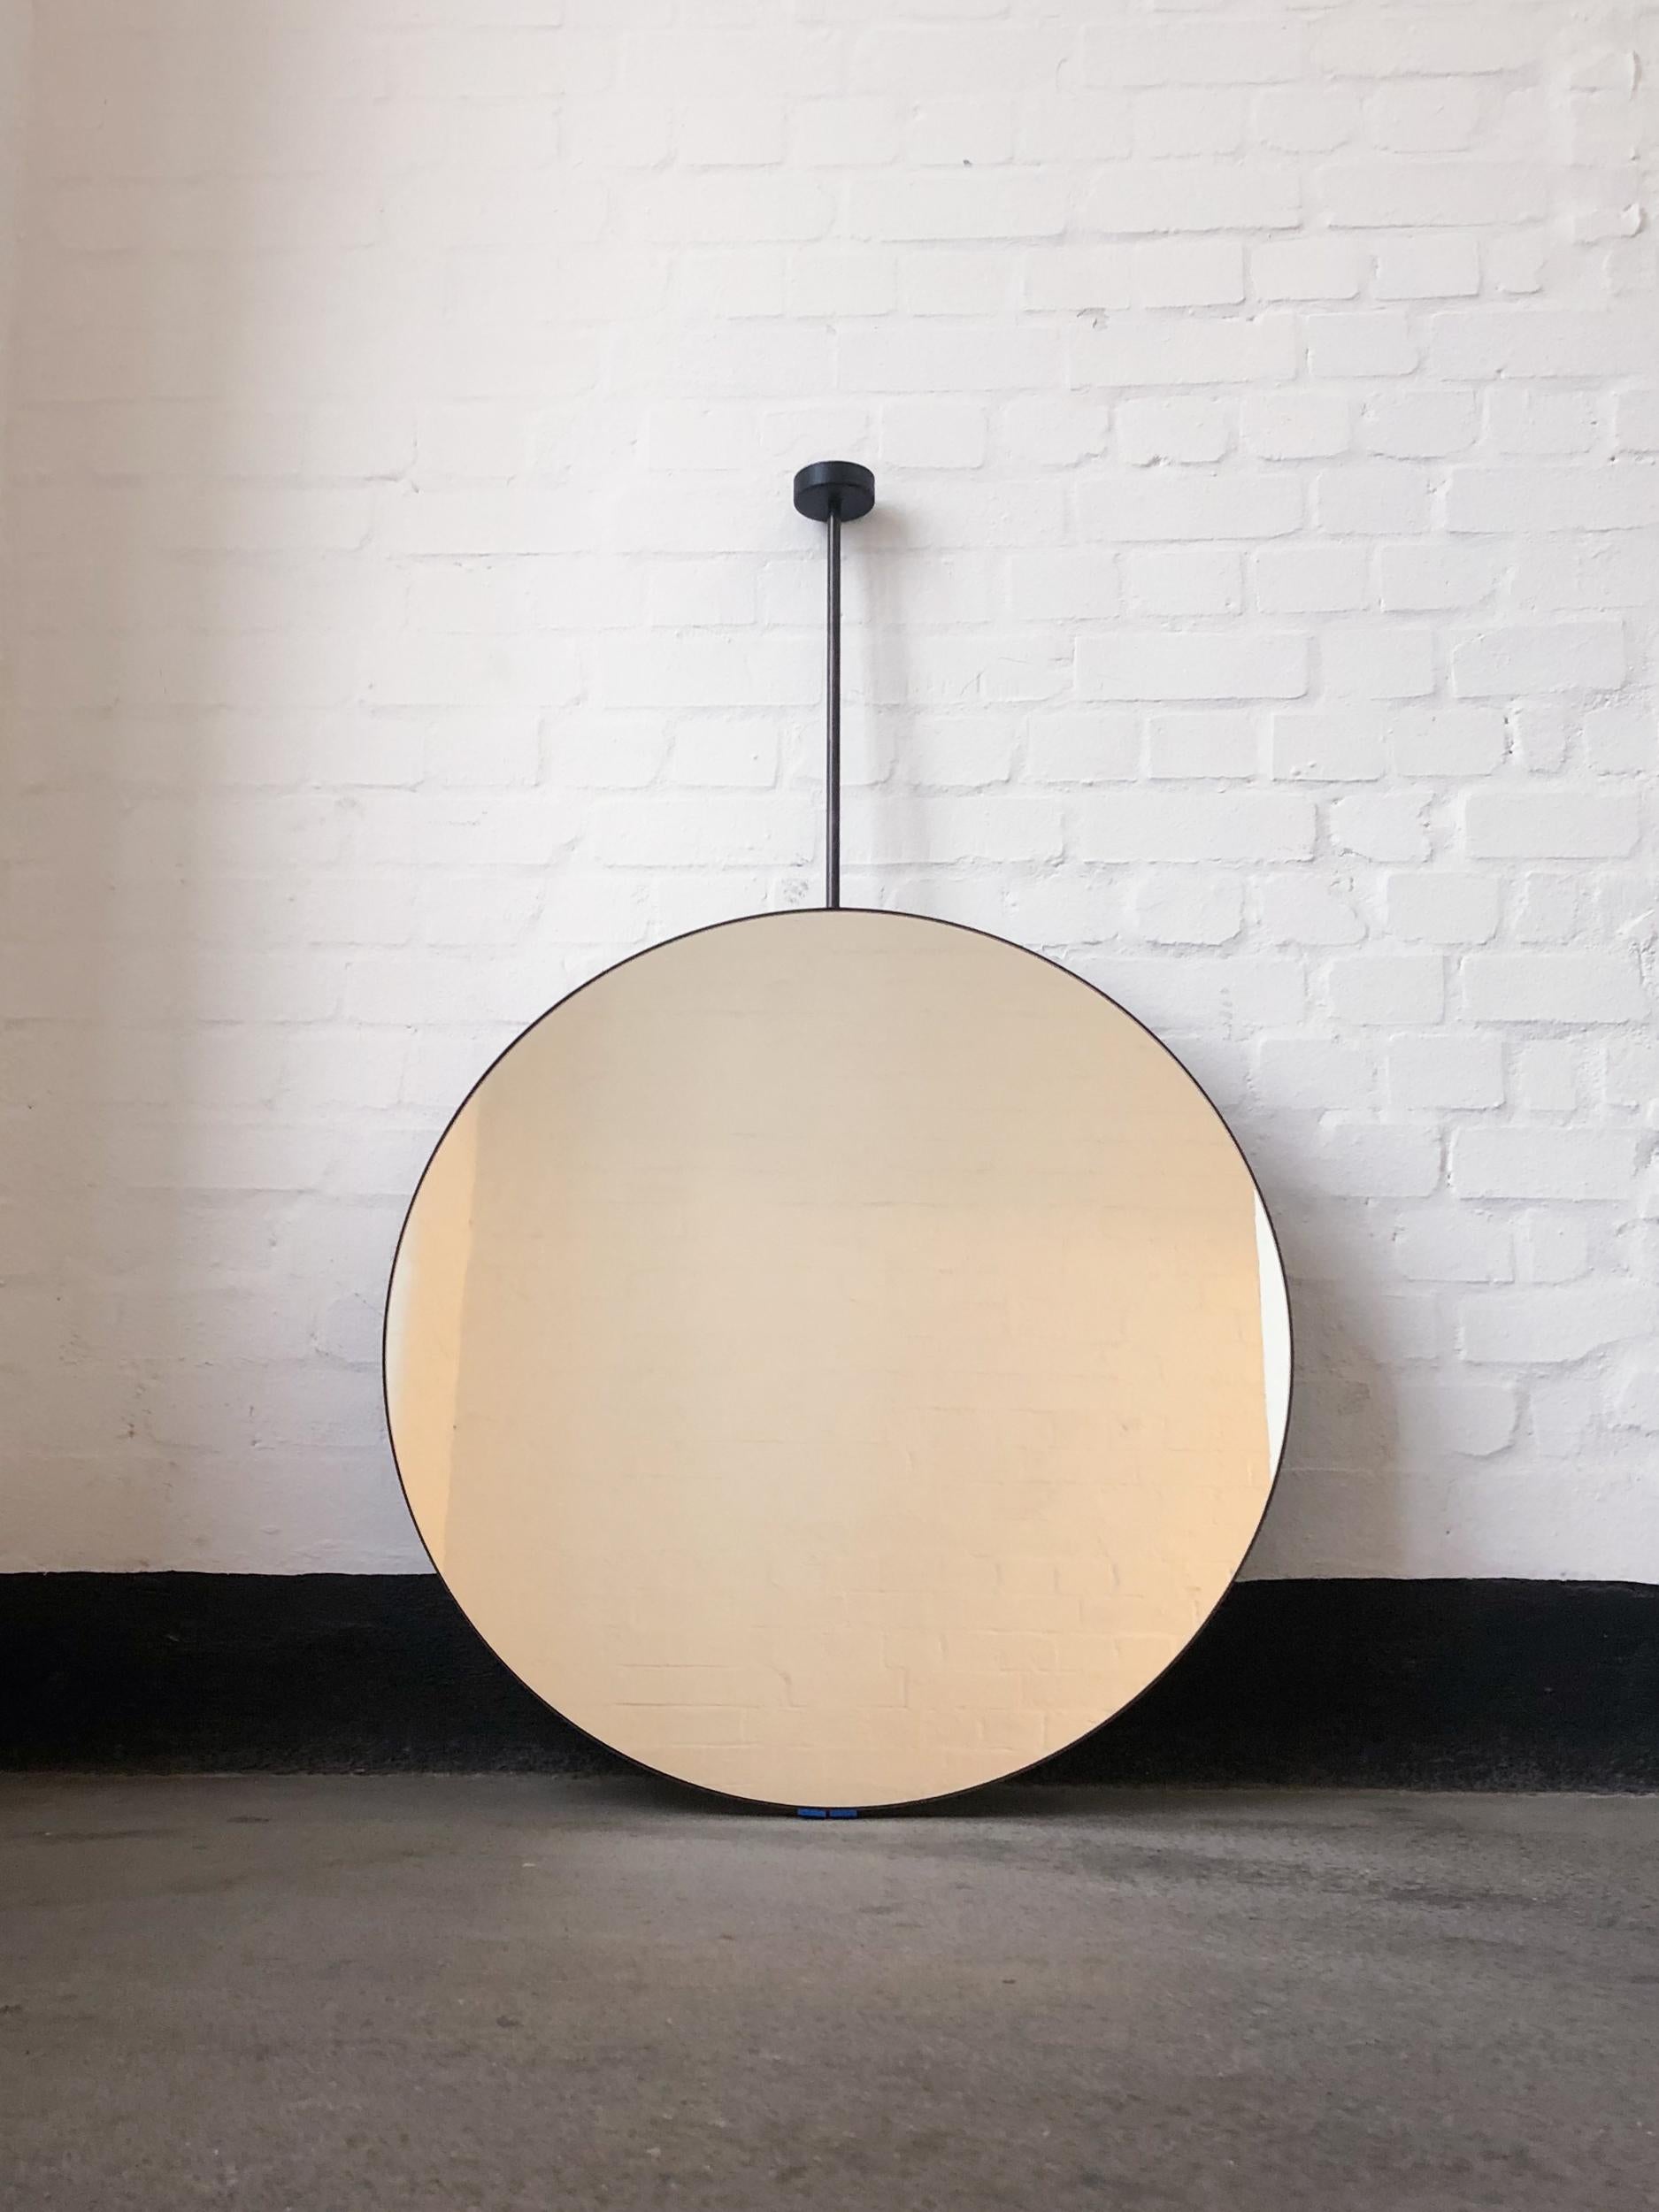 British Orbis Ceiling Suspended Round Mirror with Blackened Stainless Steel Frame For Sale